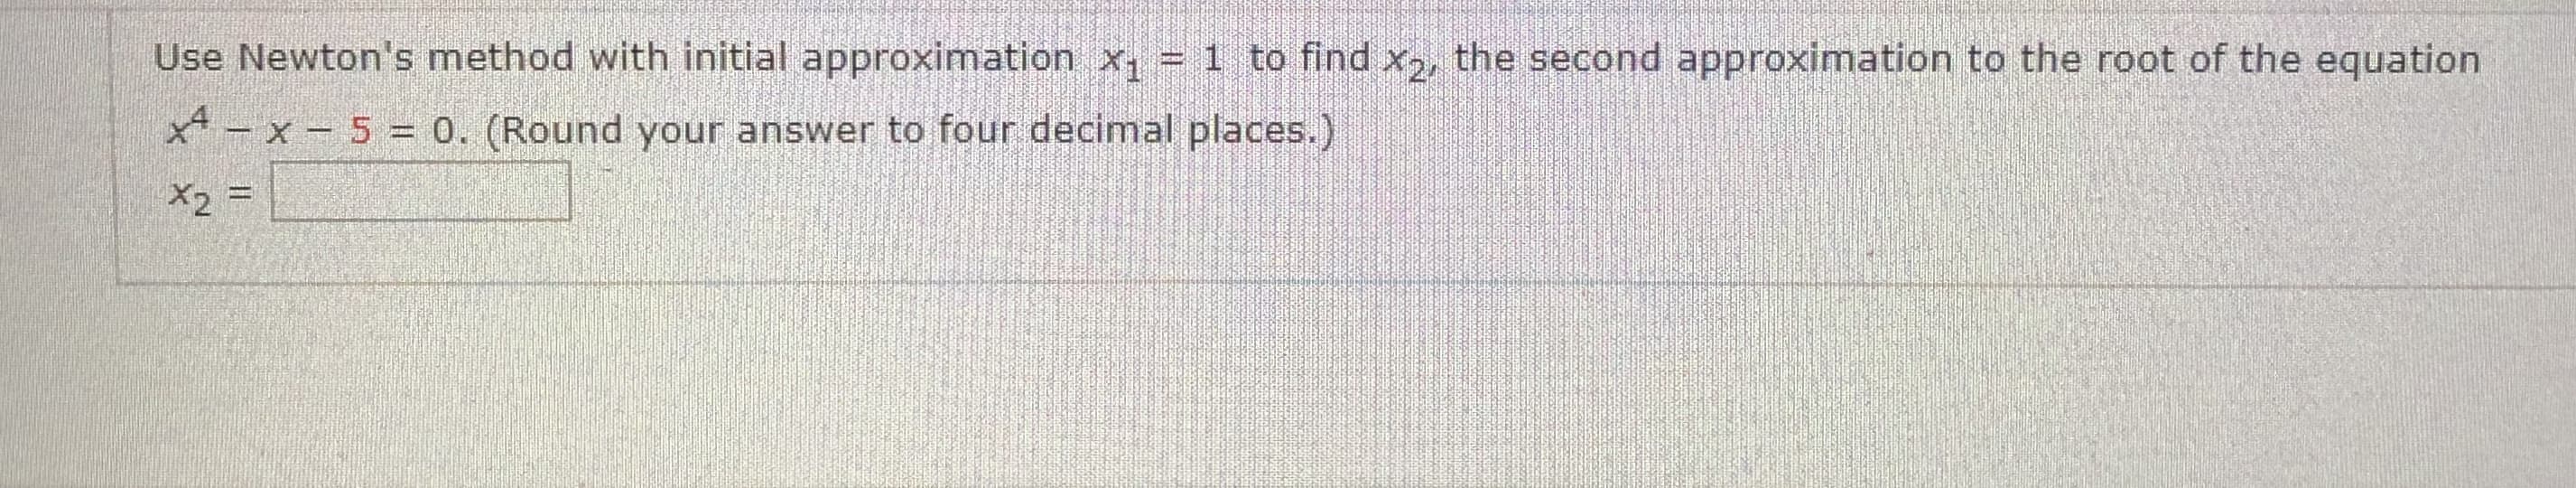 Use Newton's method with initial approximation x, = 1 to find x, the second approximation to the root of the equation
x - x- 5 = 0. (Round your answer to four decimal places.)
X2 =
%3D
